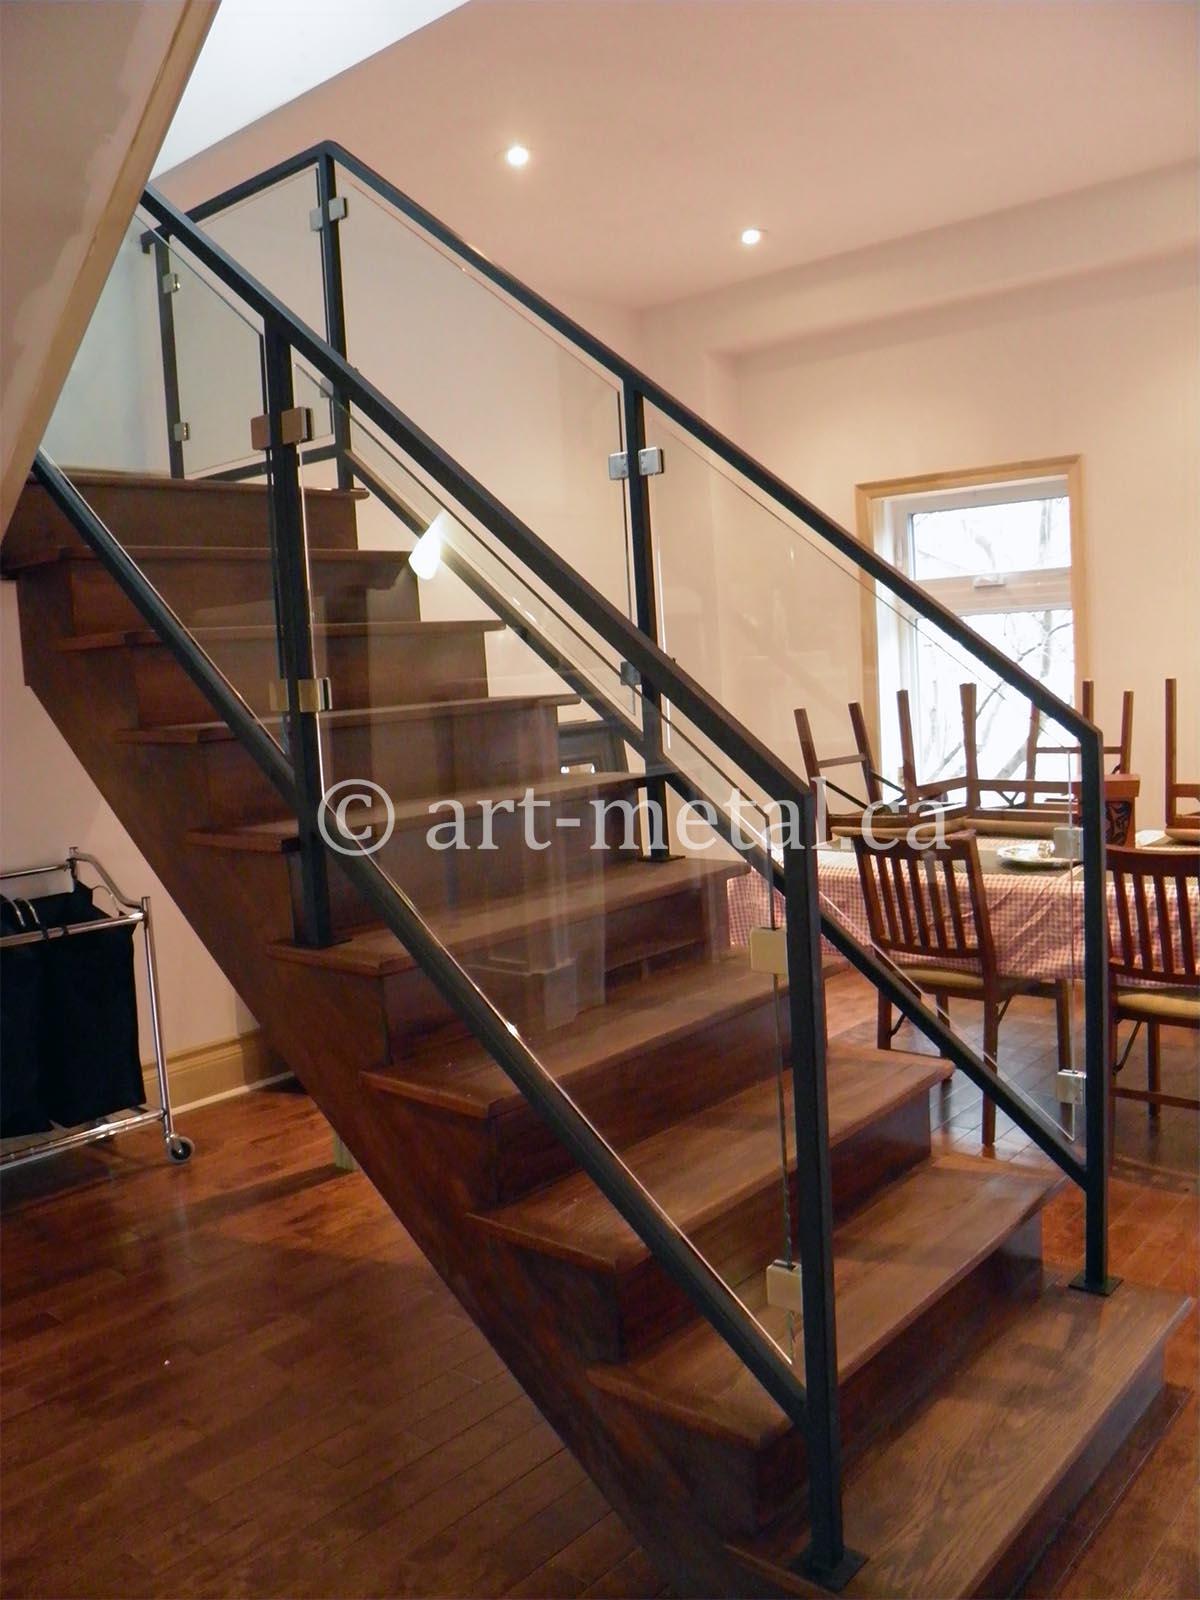 Contemporary Stair Railing For The Interior Of Your Home